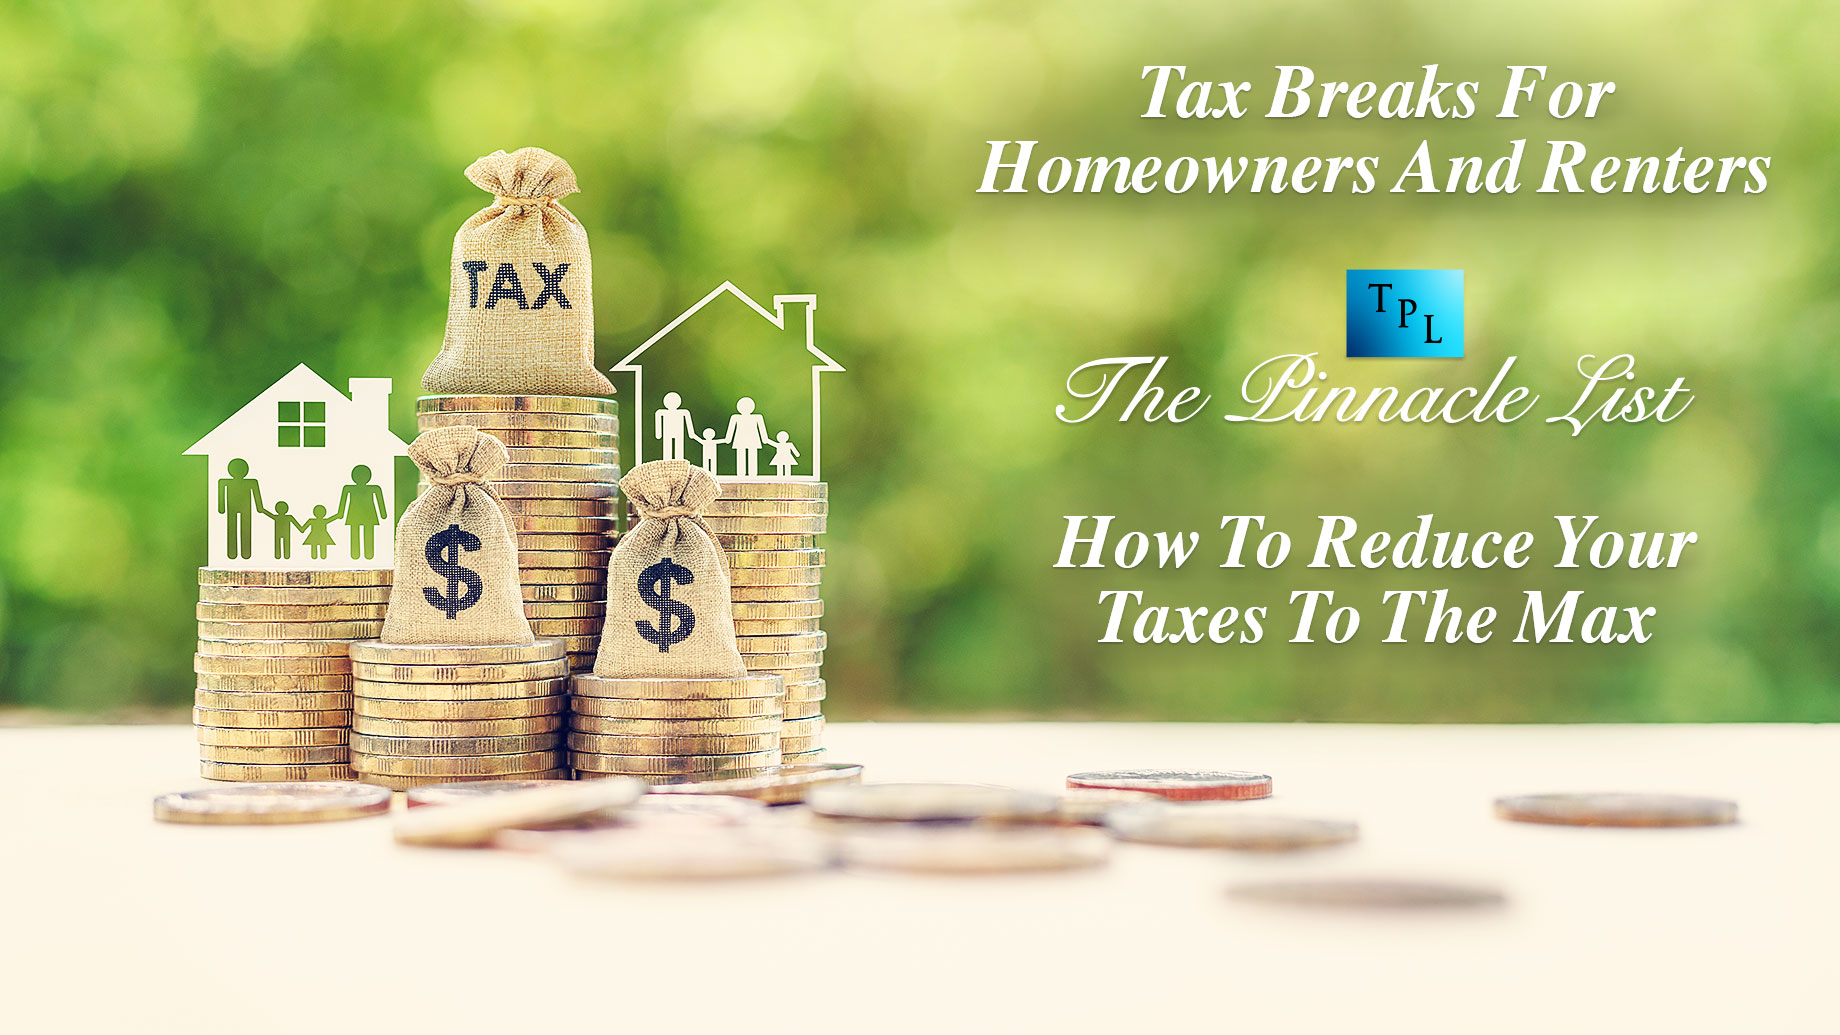 Tax Breaks For Homeowners And Renters: How To Reduce Your Taxes To The Max